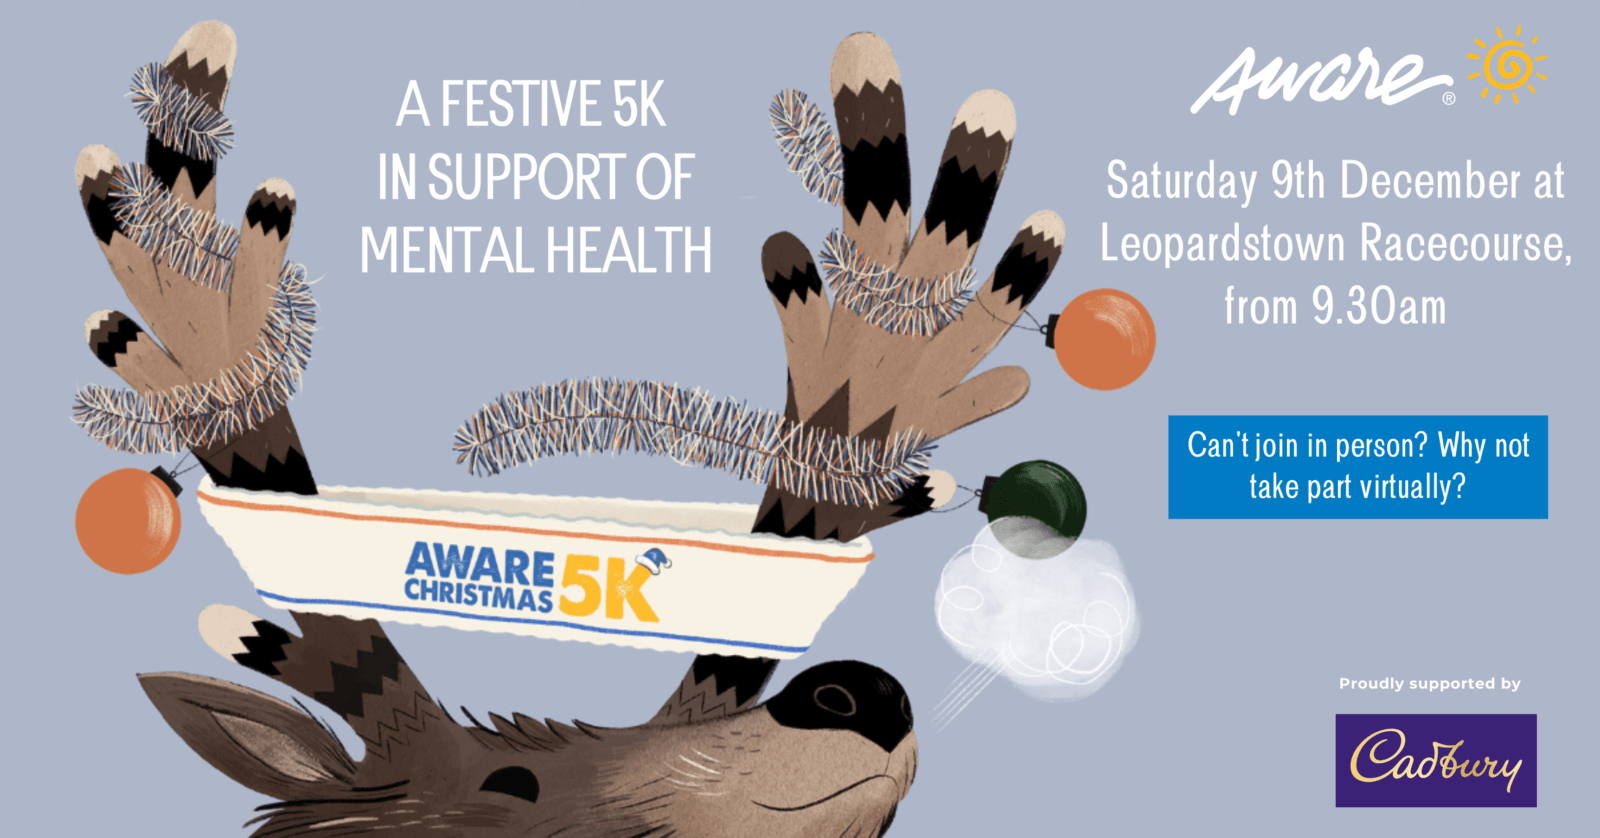 Event image with reindeer for the Aware Christmas 5K